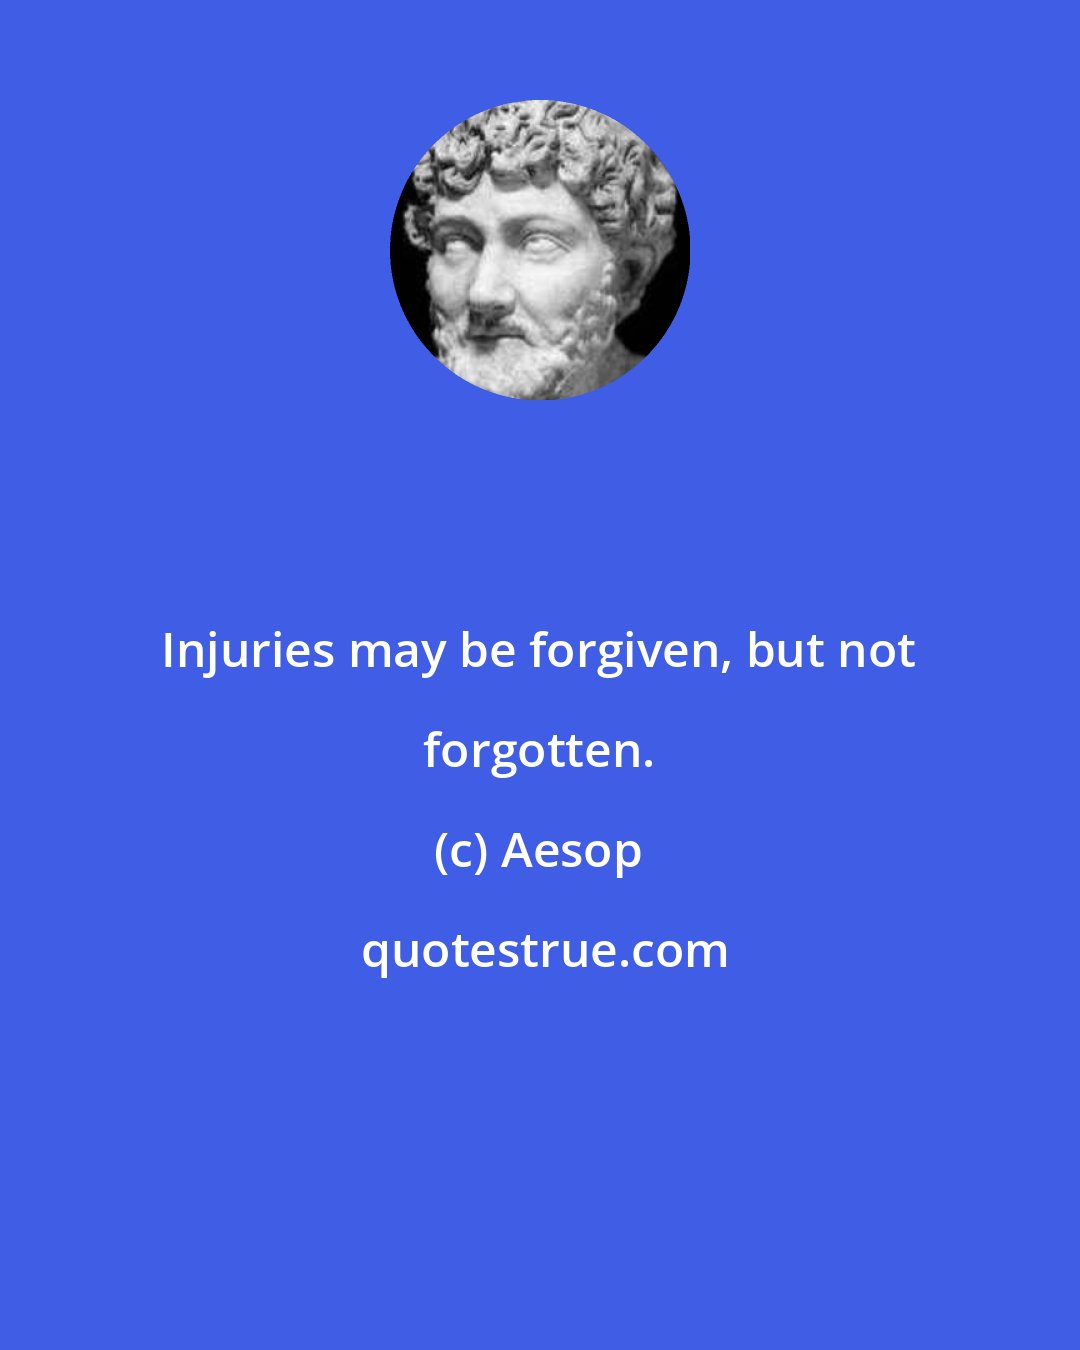 Aesop: Injuries may be forgiven, but not forgotten.